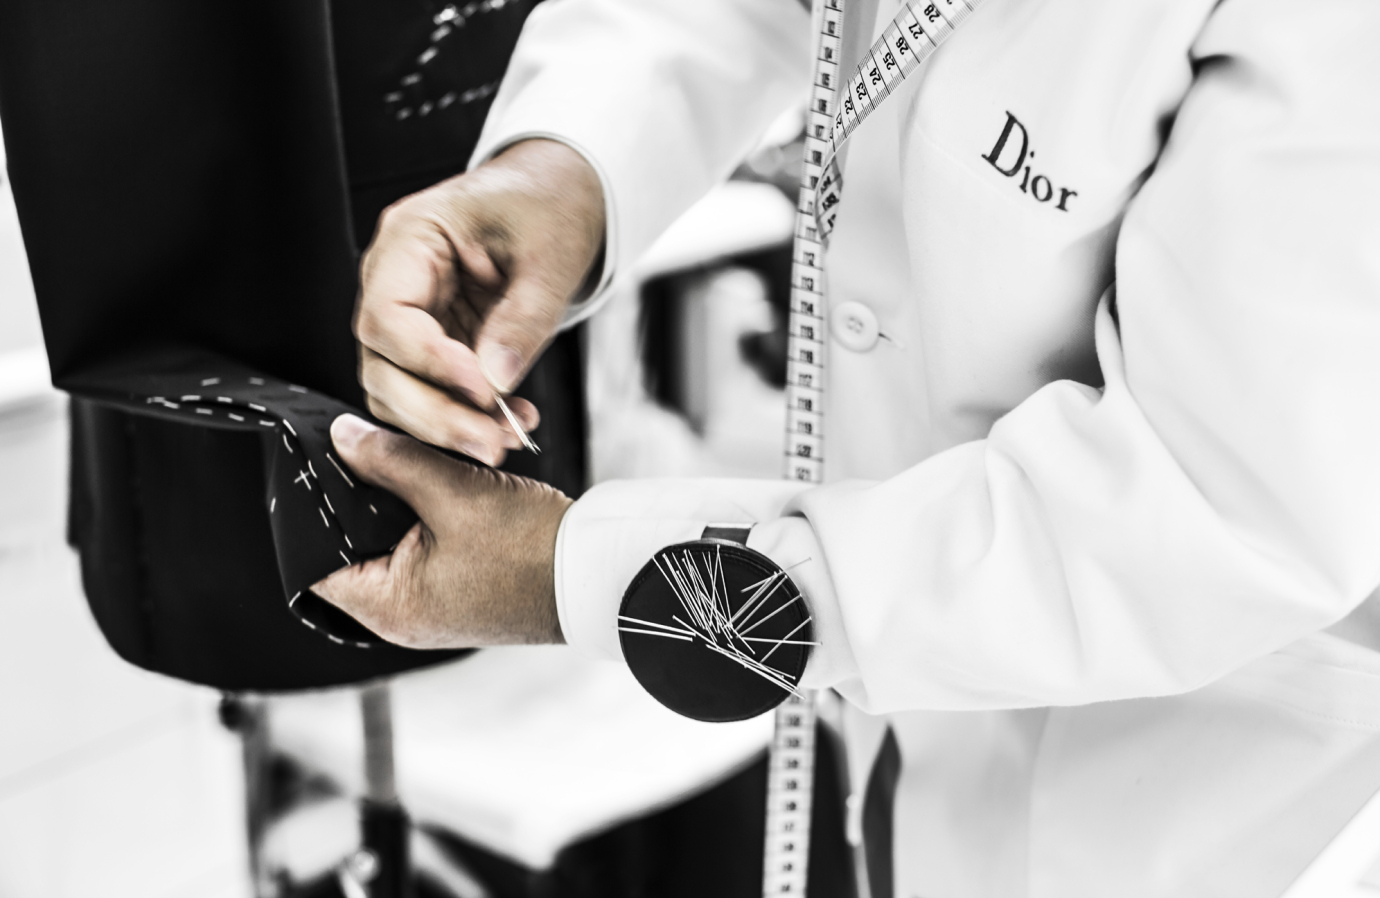 Christian Dior Haute Couture And Ready To Wear Fashion Leather Goods Lvmh